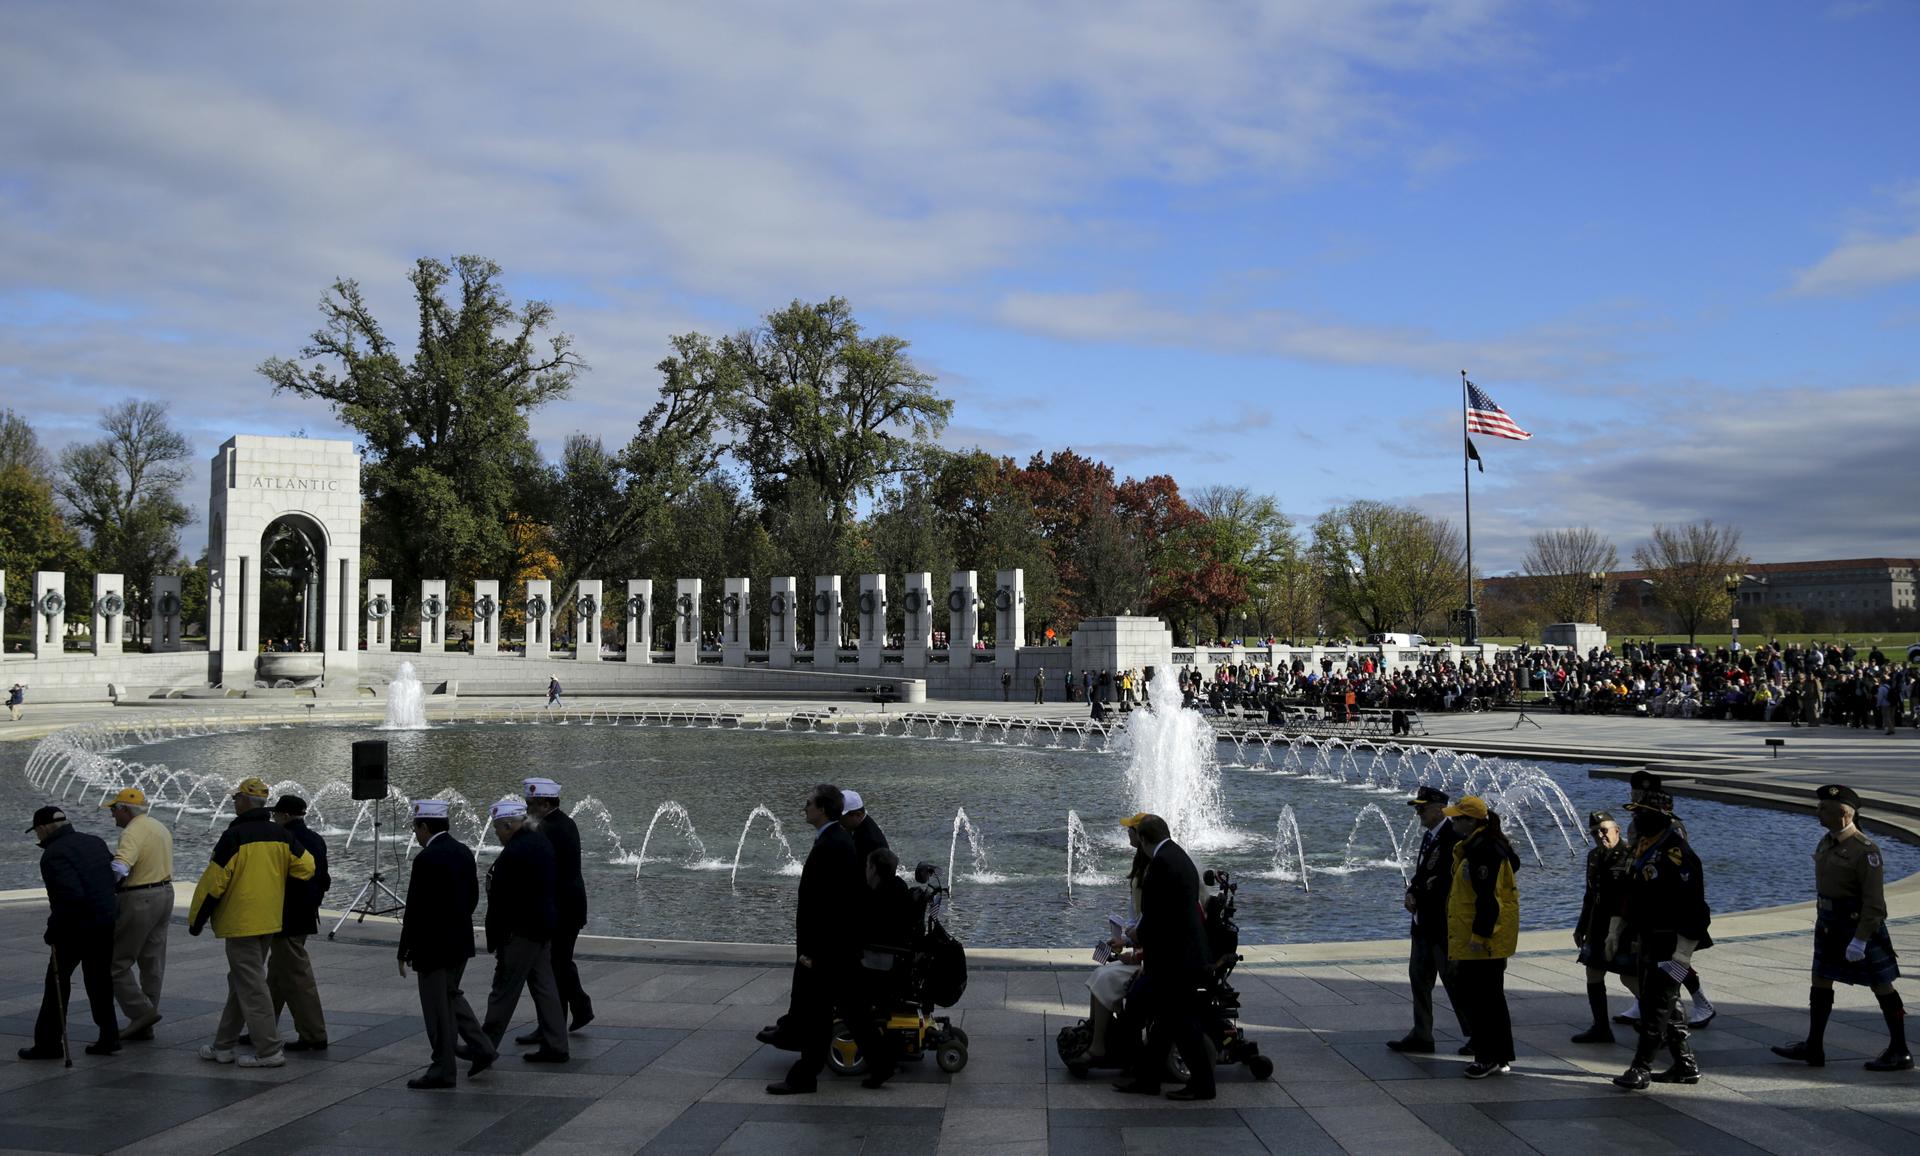 World War II veterans walk to a wreath laying ceremony at the National World War II Memorial on Veteran's Day to pay tribute to the more than 16 million men and women who served with U.S. armed forces during World War II.